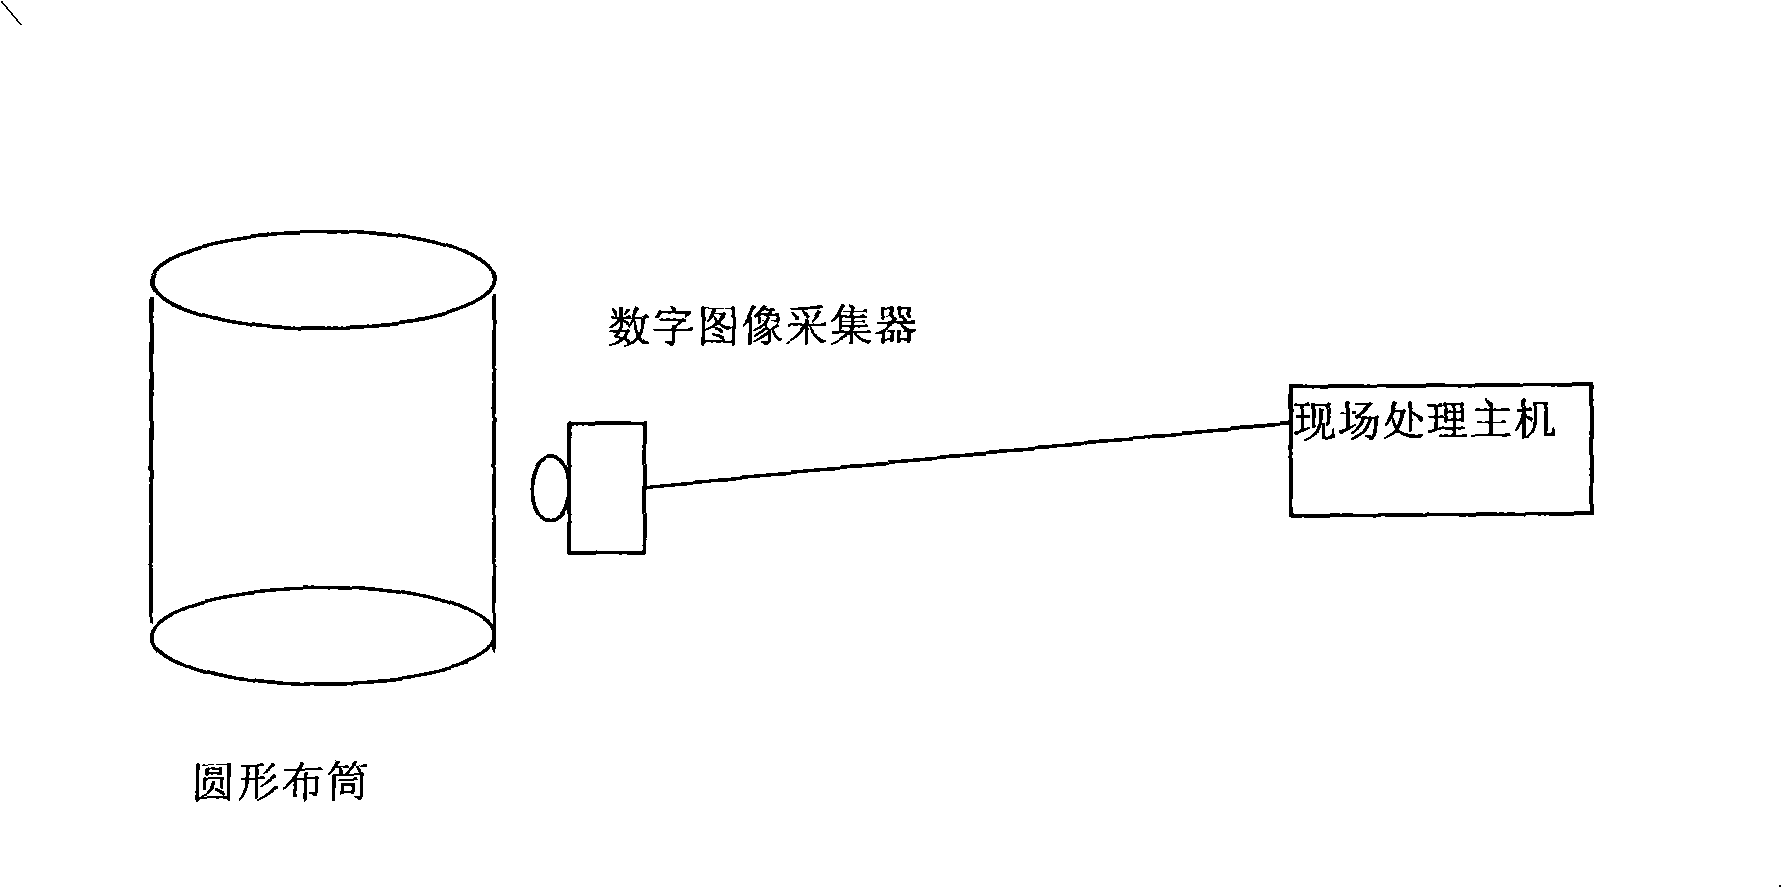 Round knitting machine on-line quality monitoring method based on computer pattern recognition principle